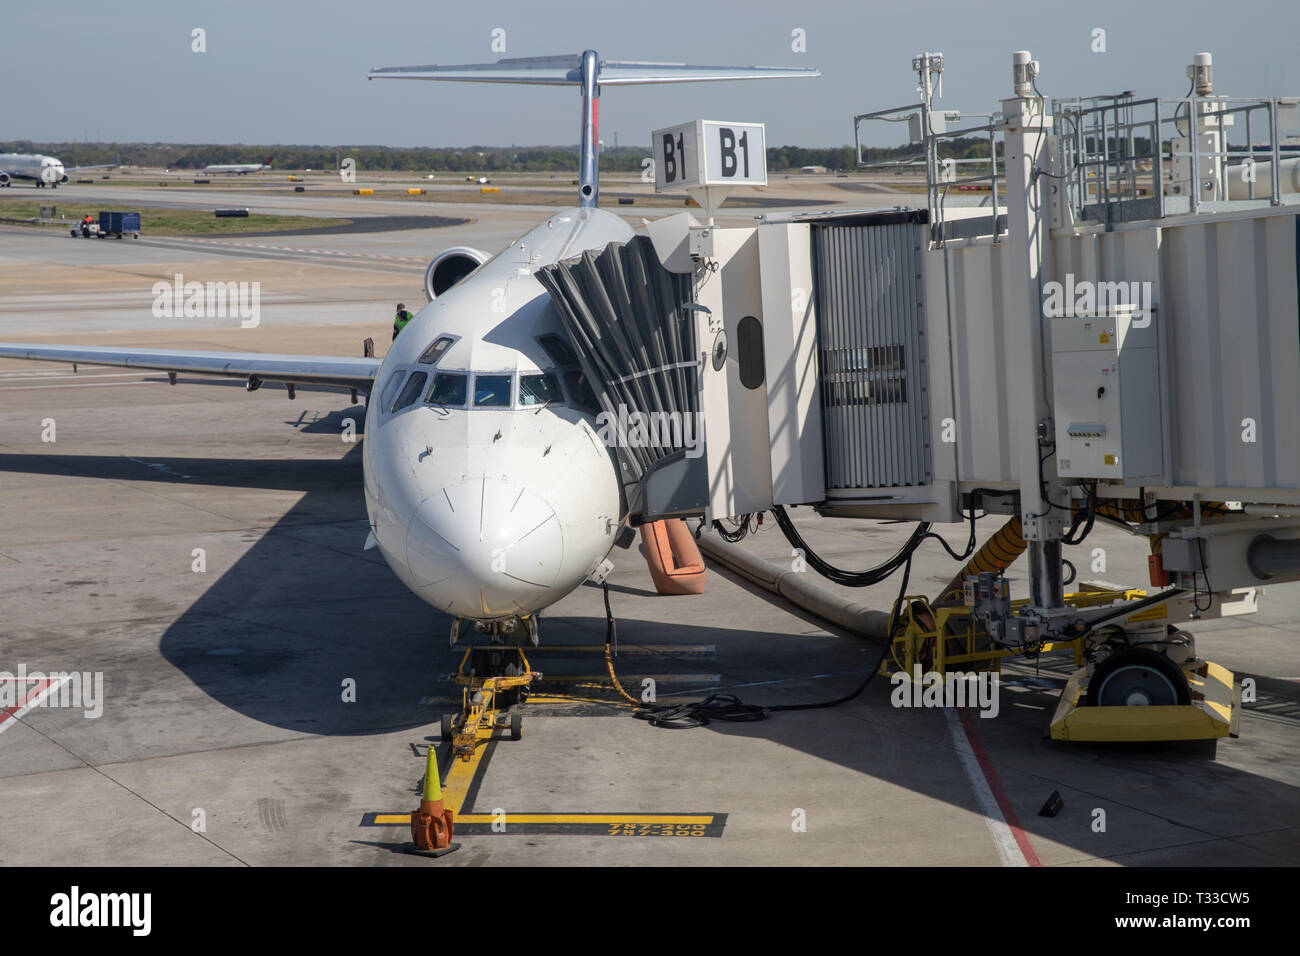 Commercial Aircraft parked at gate with jet bridge for passenger boarding Stock Photo